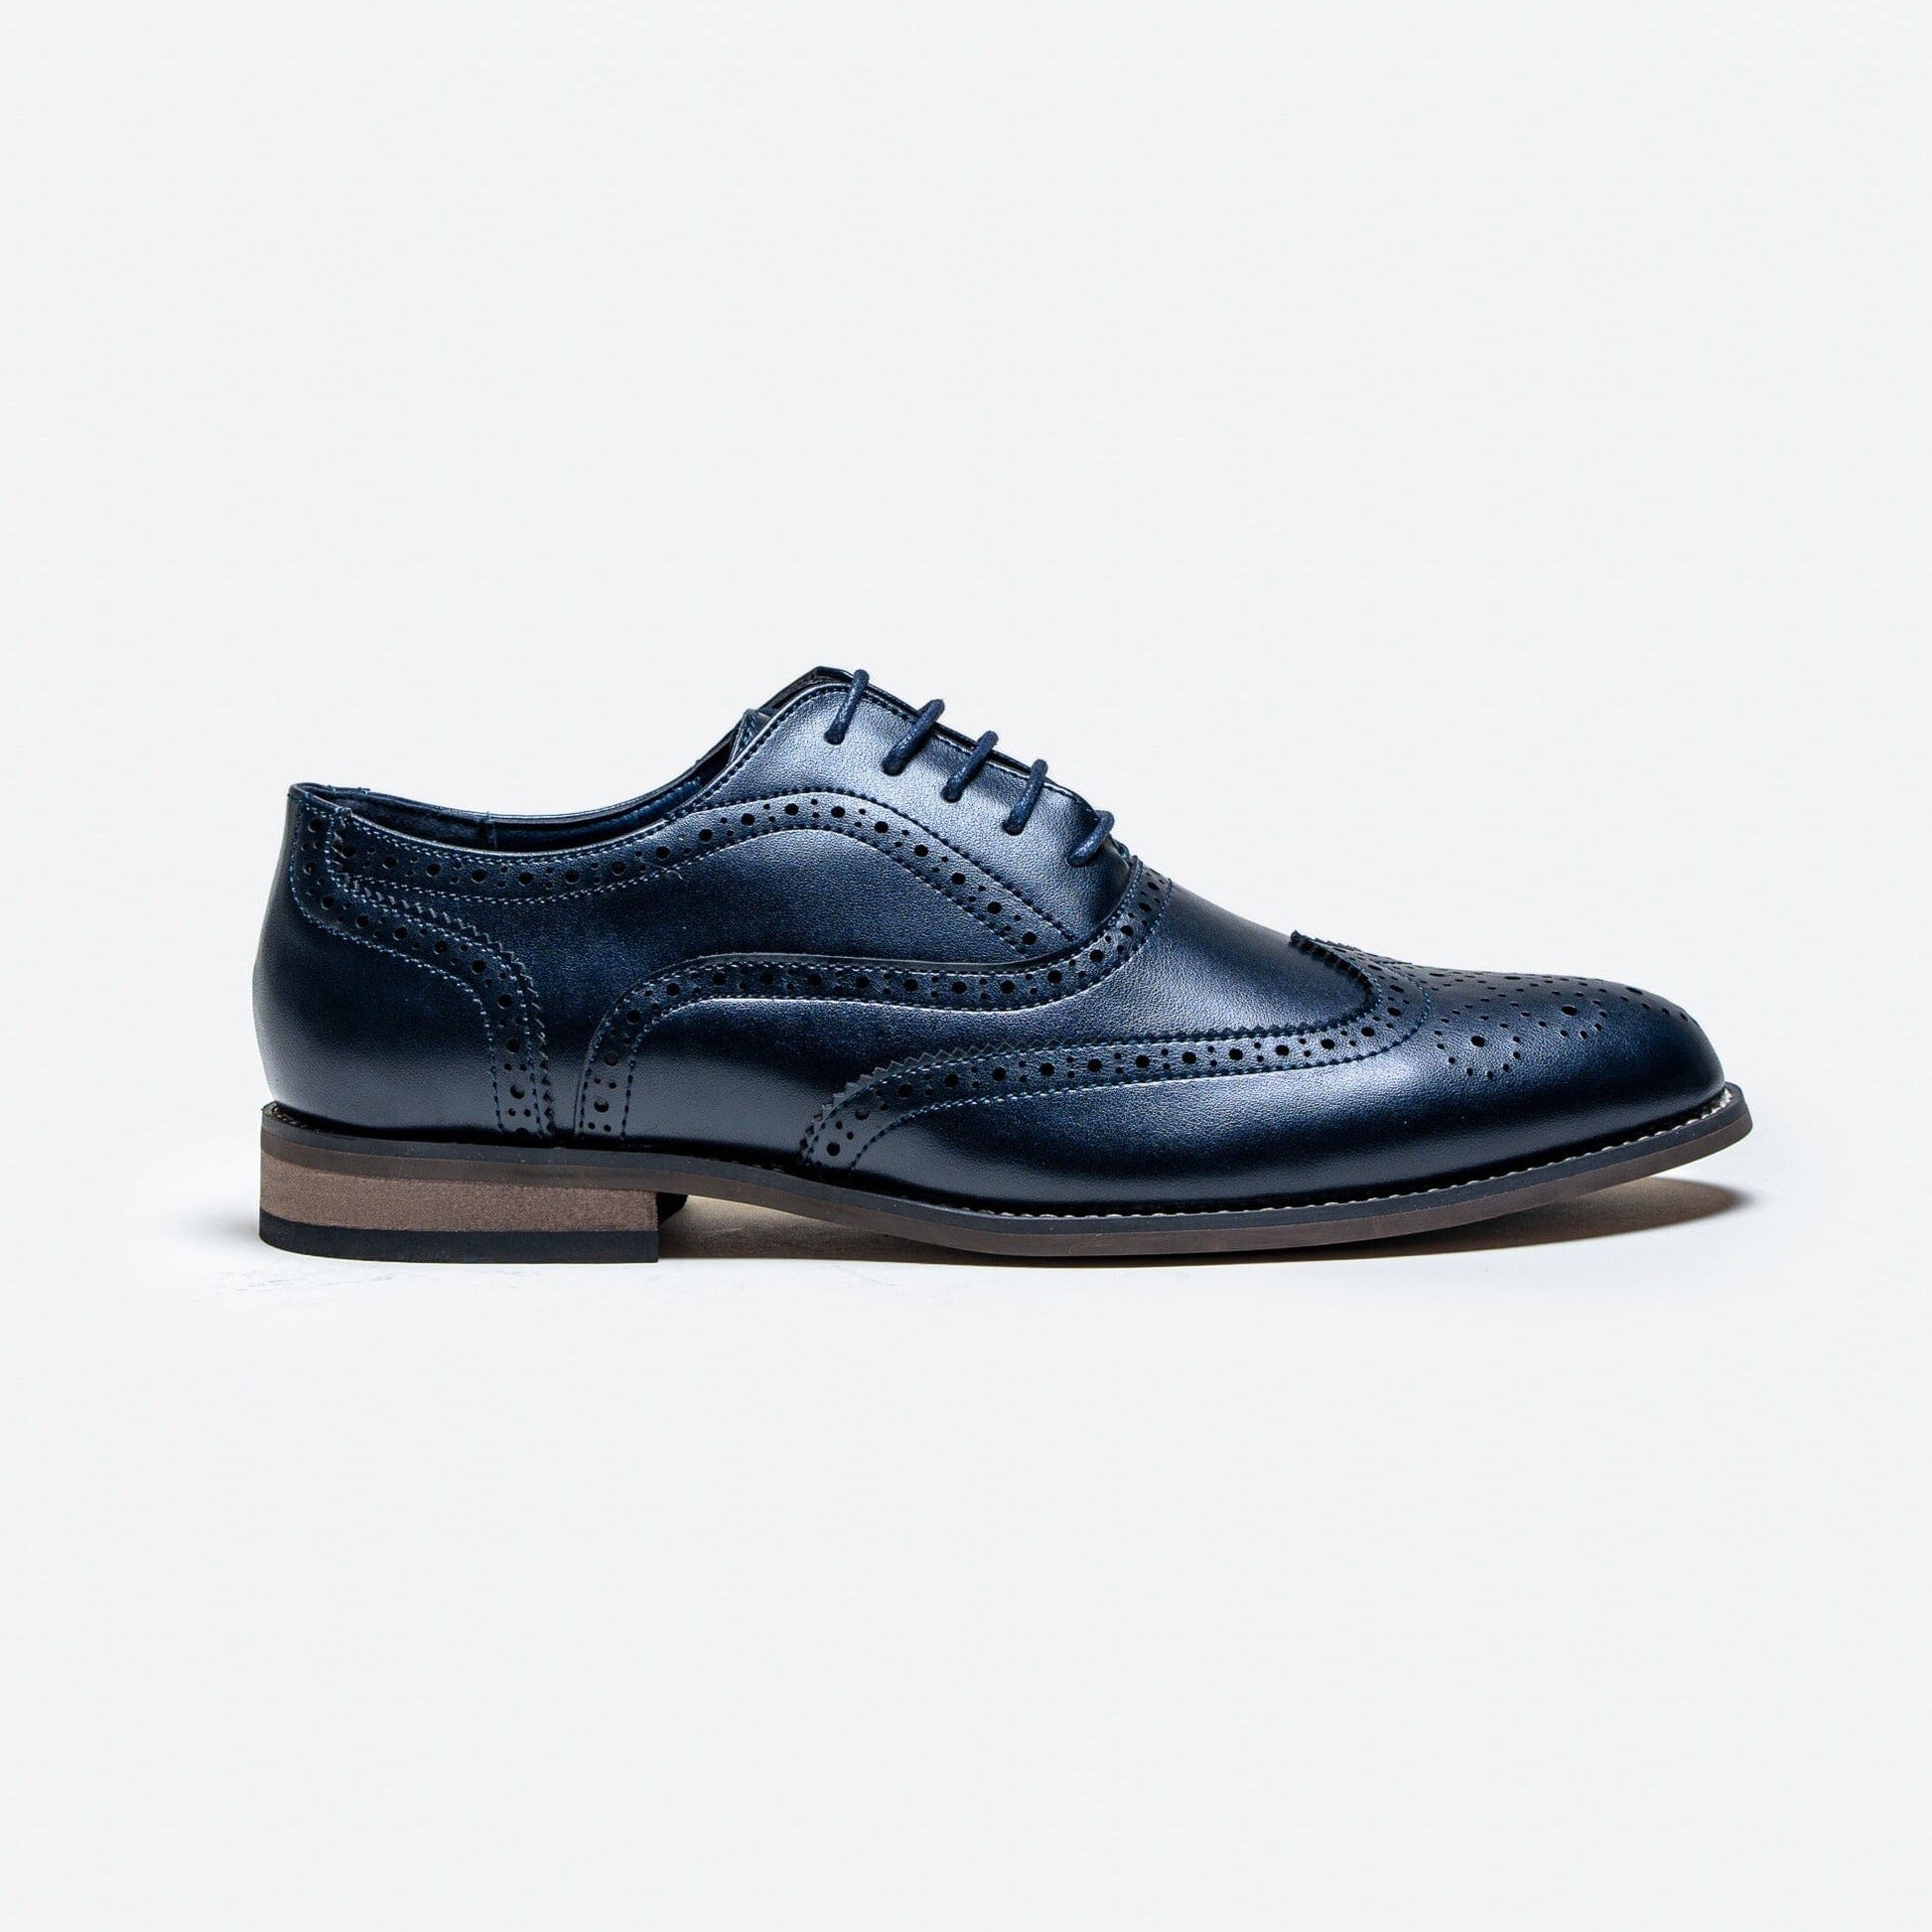 Clark Navy Brogue Shoes - OOS - 2/8/23 - Shoes - 7 - THREADPEPPER